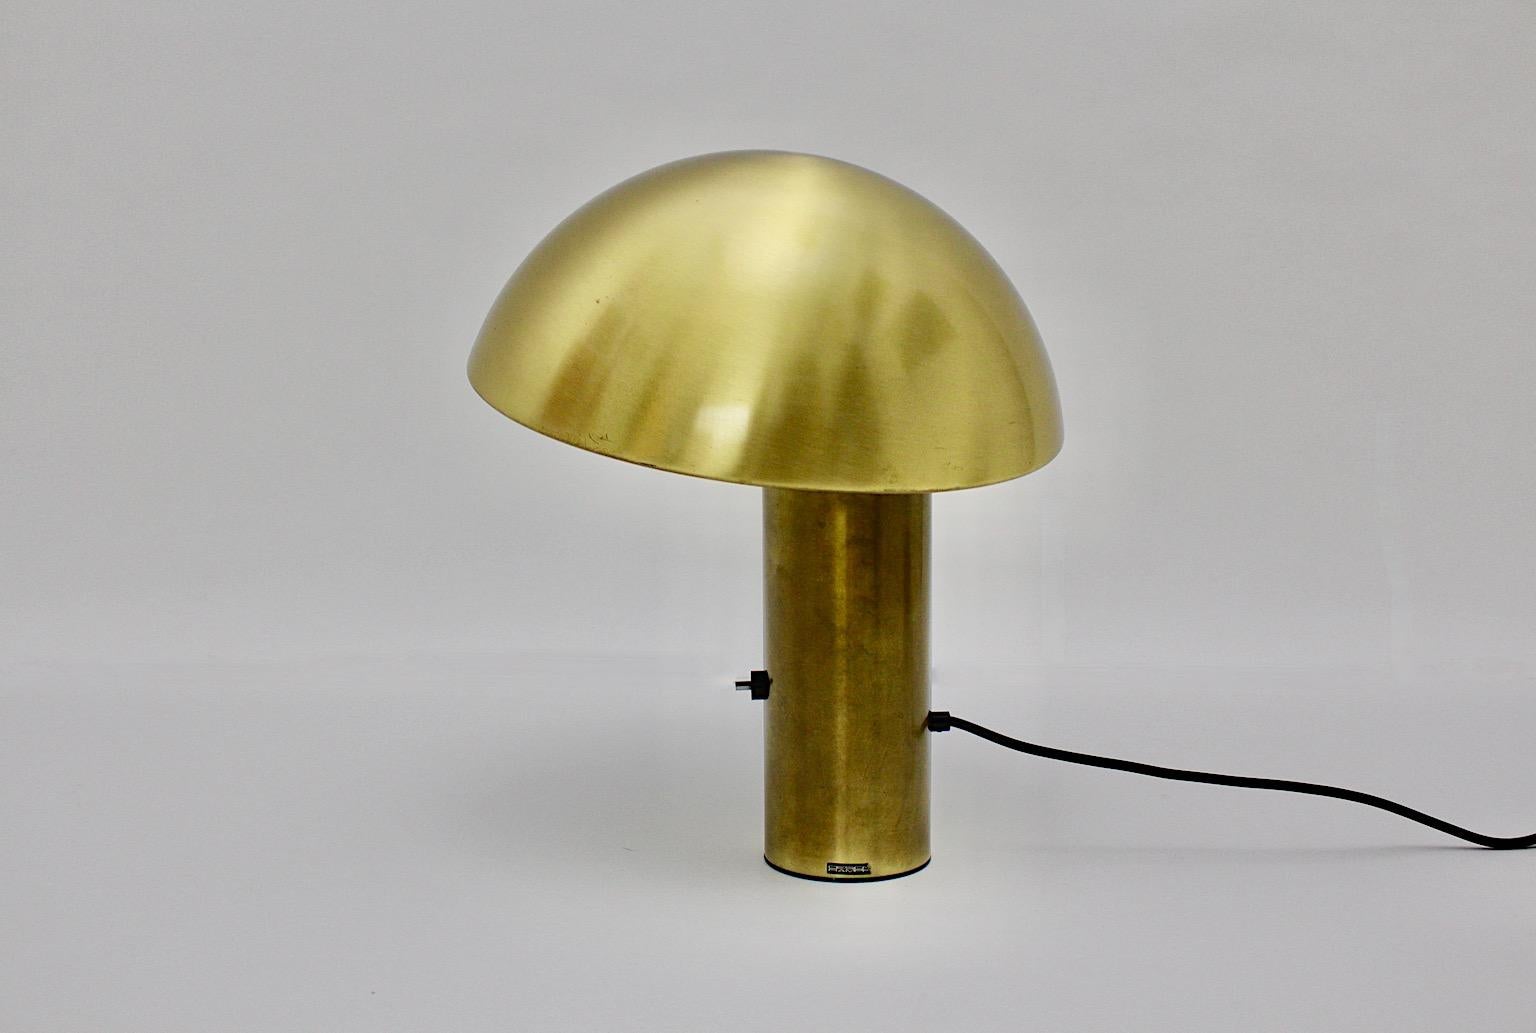 Space Age vintage brass mushroom like table lamp by Franco Mirenzi for
Valenti Luce 1979 Italy.
The model Vaga from brass and white metal shows dimmable feature, an on/off switch and one E 27 socket.
Labeled on the base with name Design